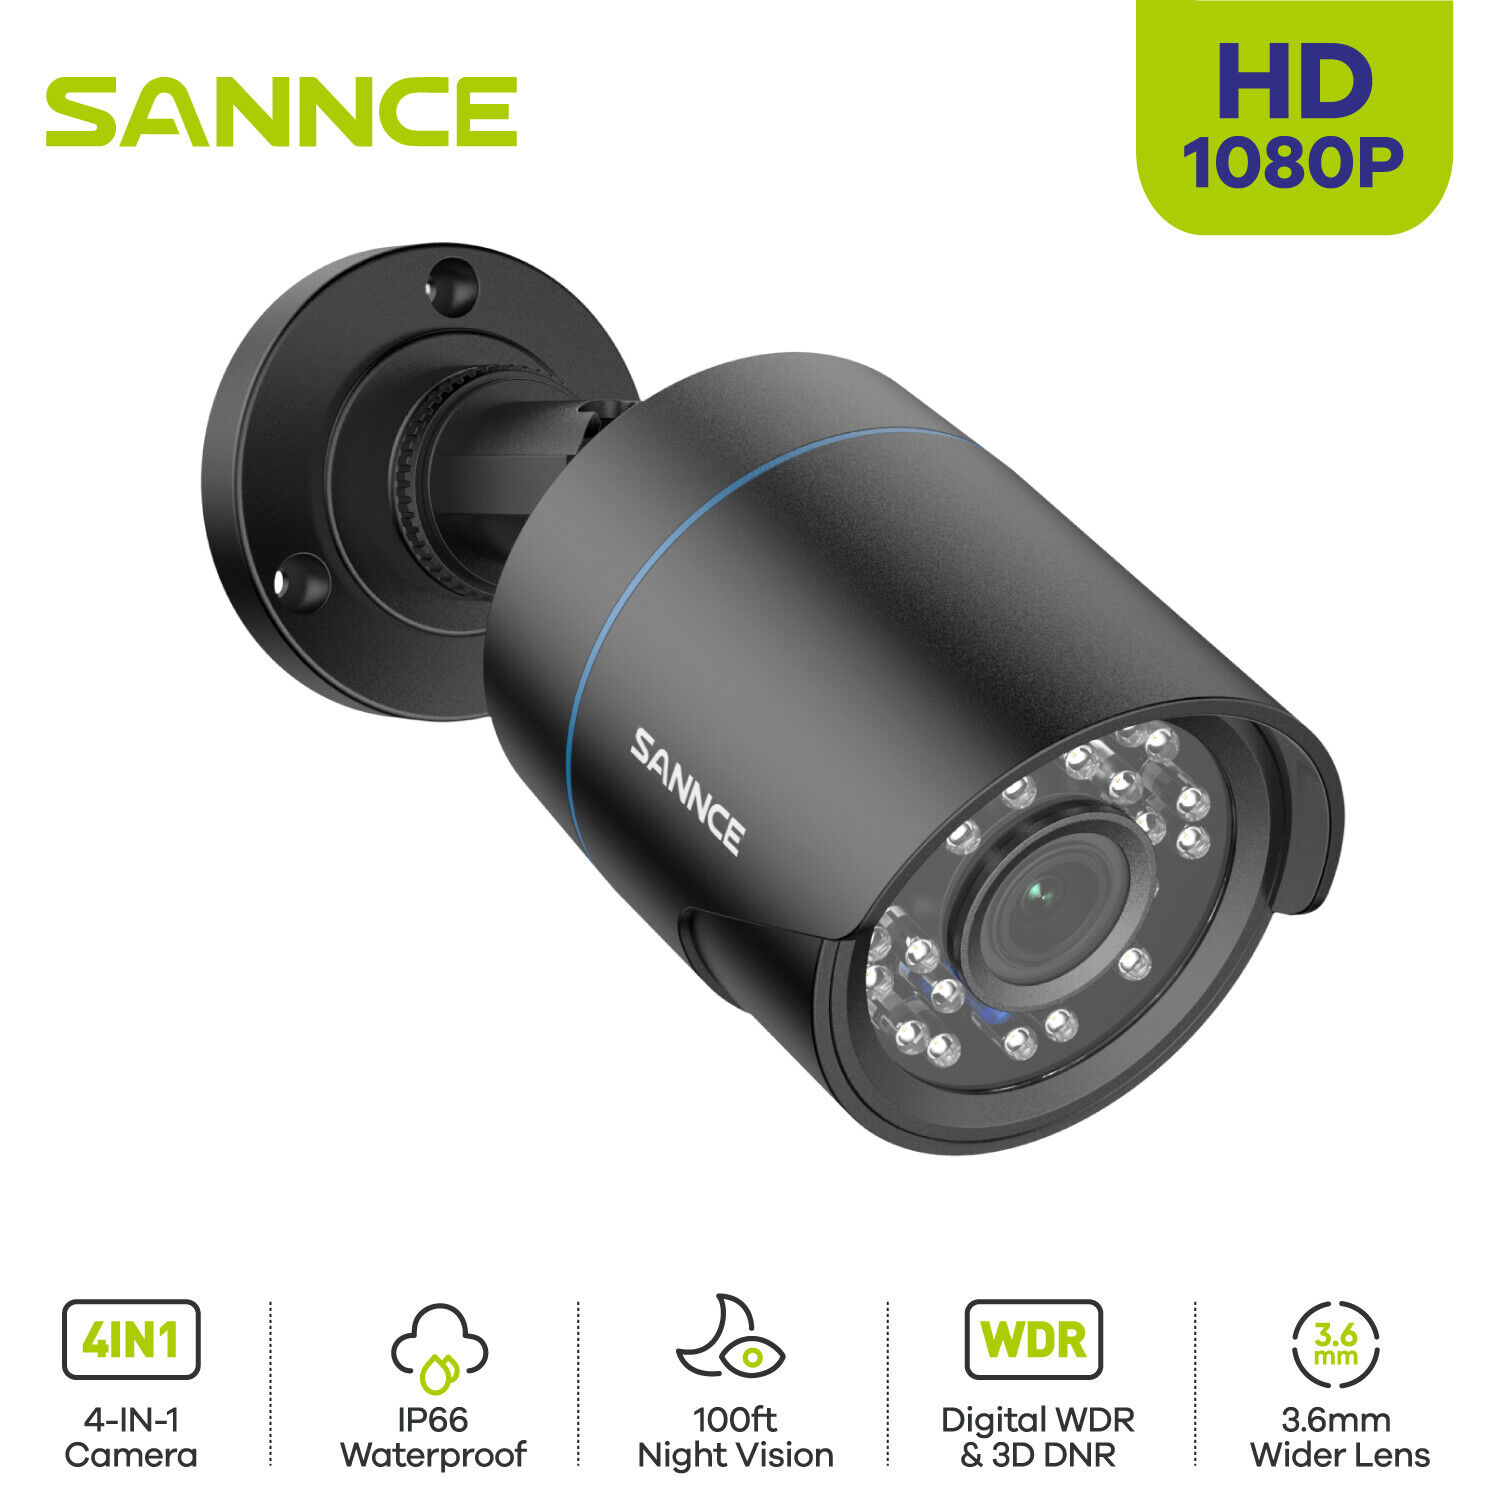 SANNCE Bullet 4IN1 HD 1080p Outdoor CCTV Camera £30 post thumbnail image